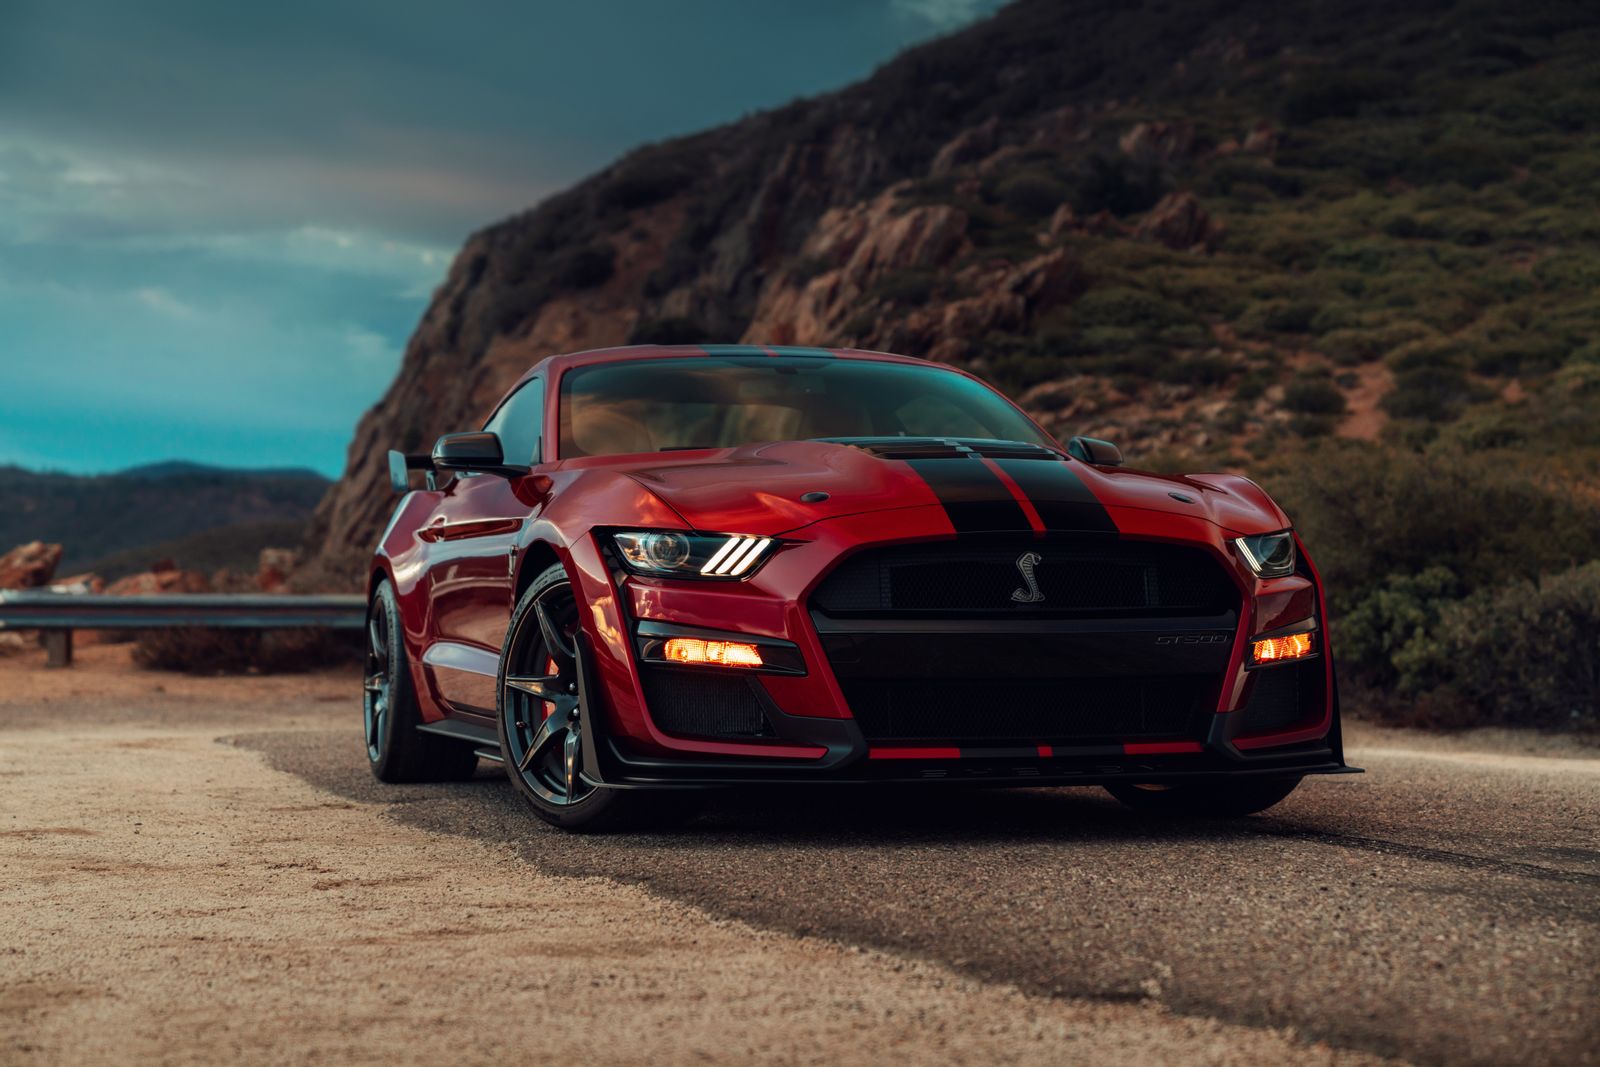 Ford Shelby gt500. Ford Mustang Shelby gt500 2020. Форд Мустанг gt 2020. Форд Мустанг gt 500 2020. Красивая заставка машины